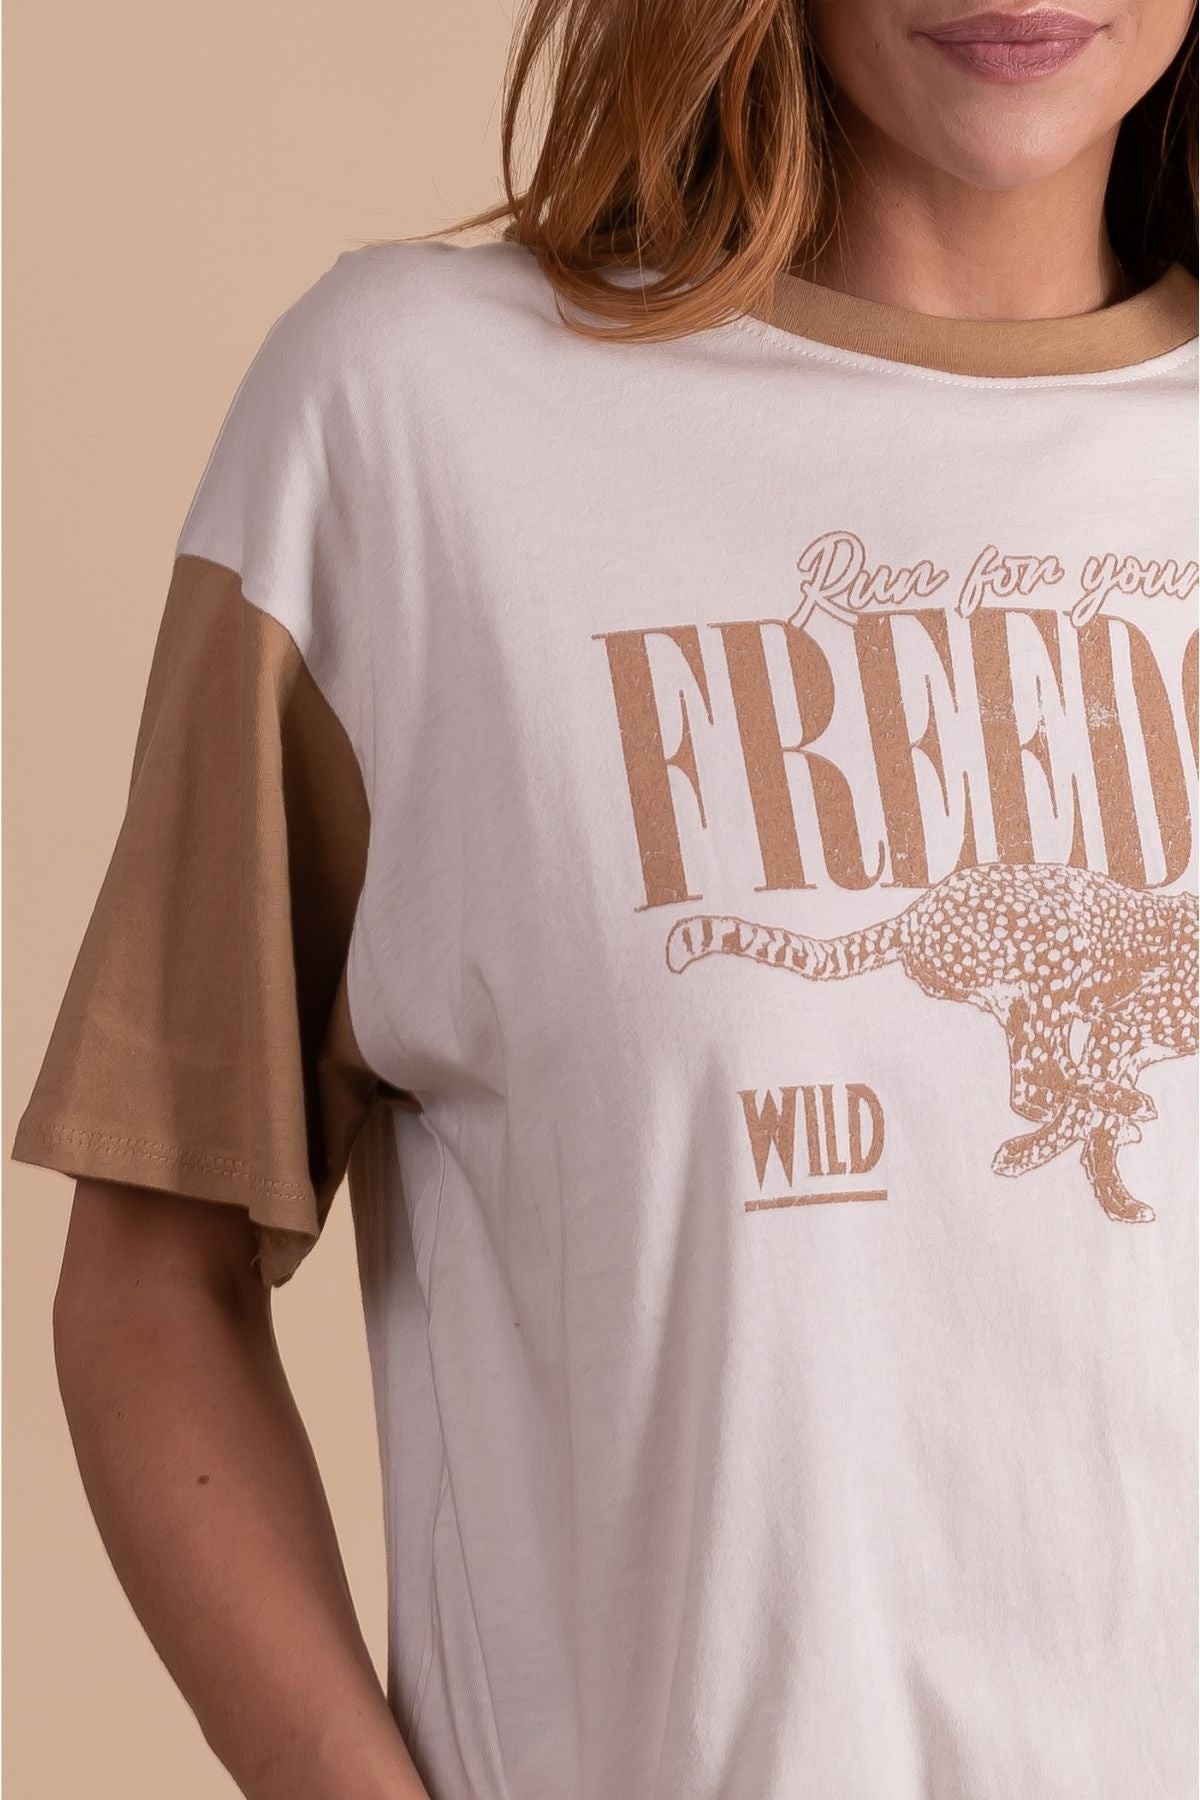 Off White Womens Graphic Tee "Run For Your Freedom"